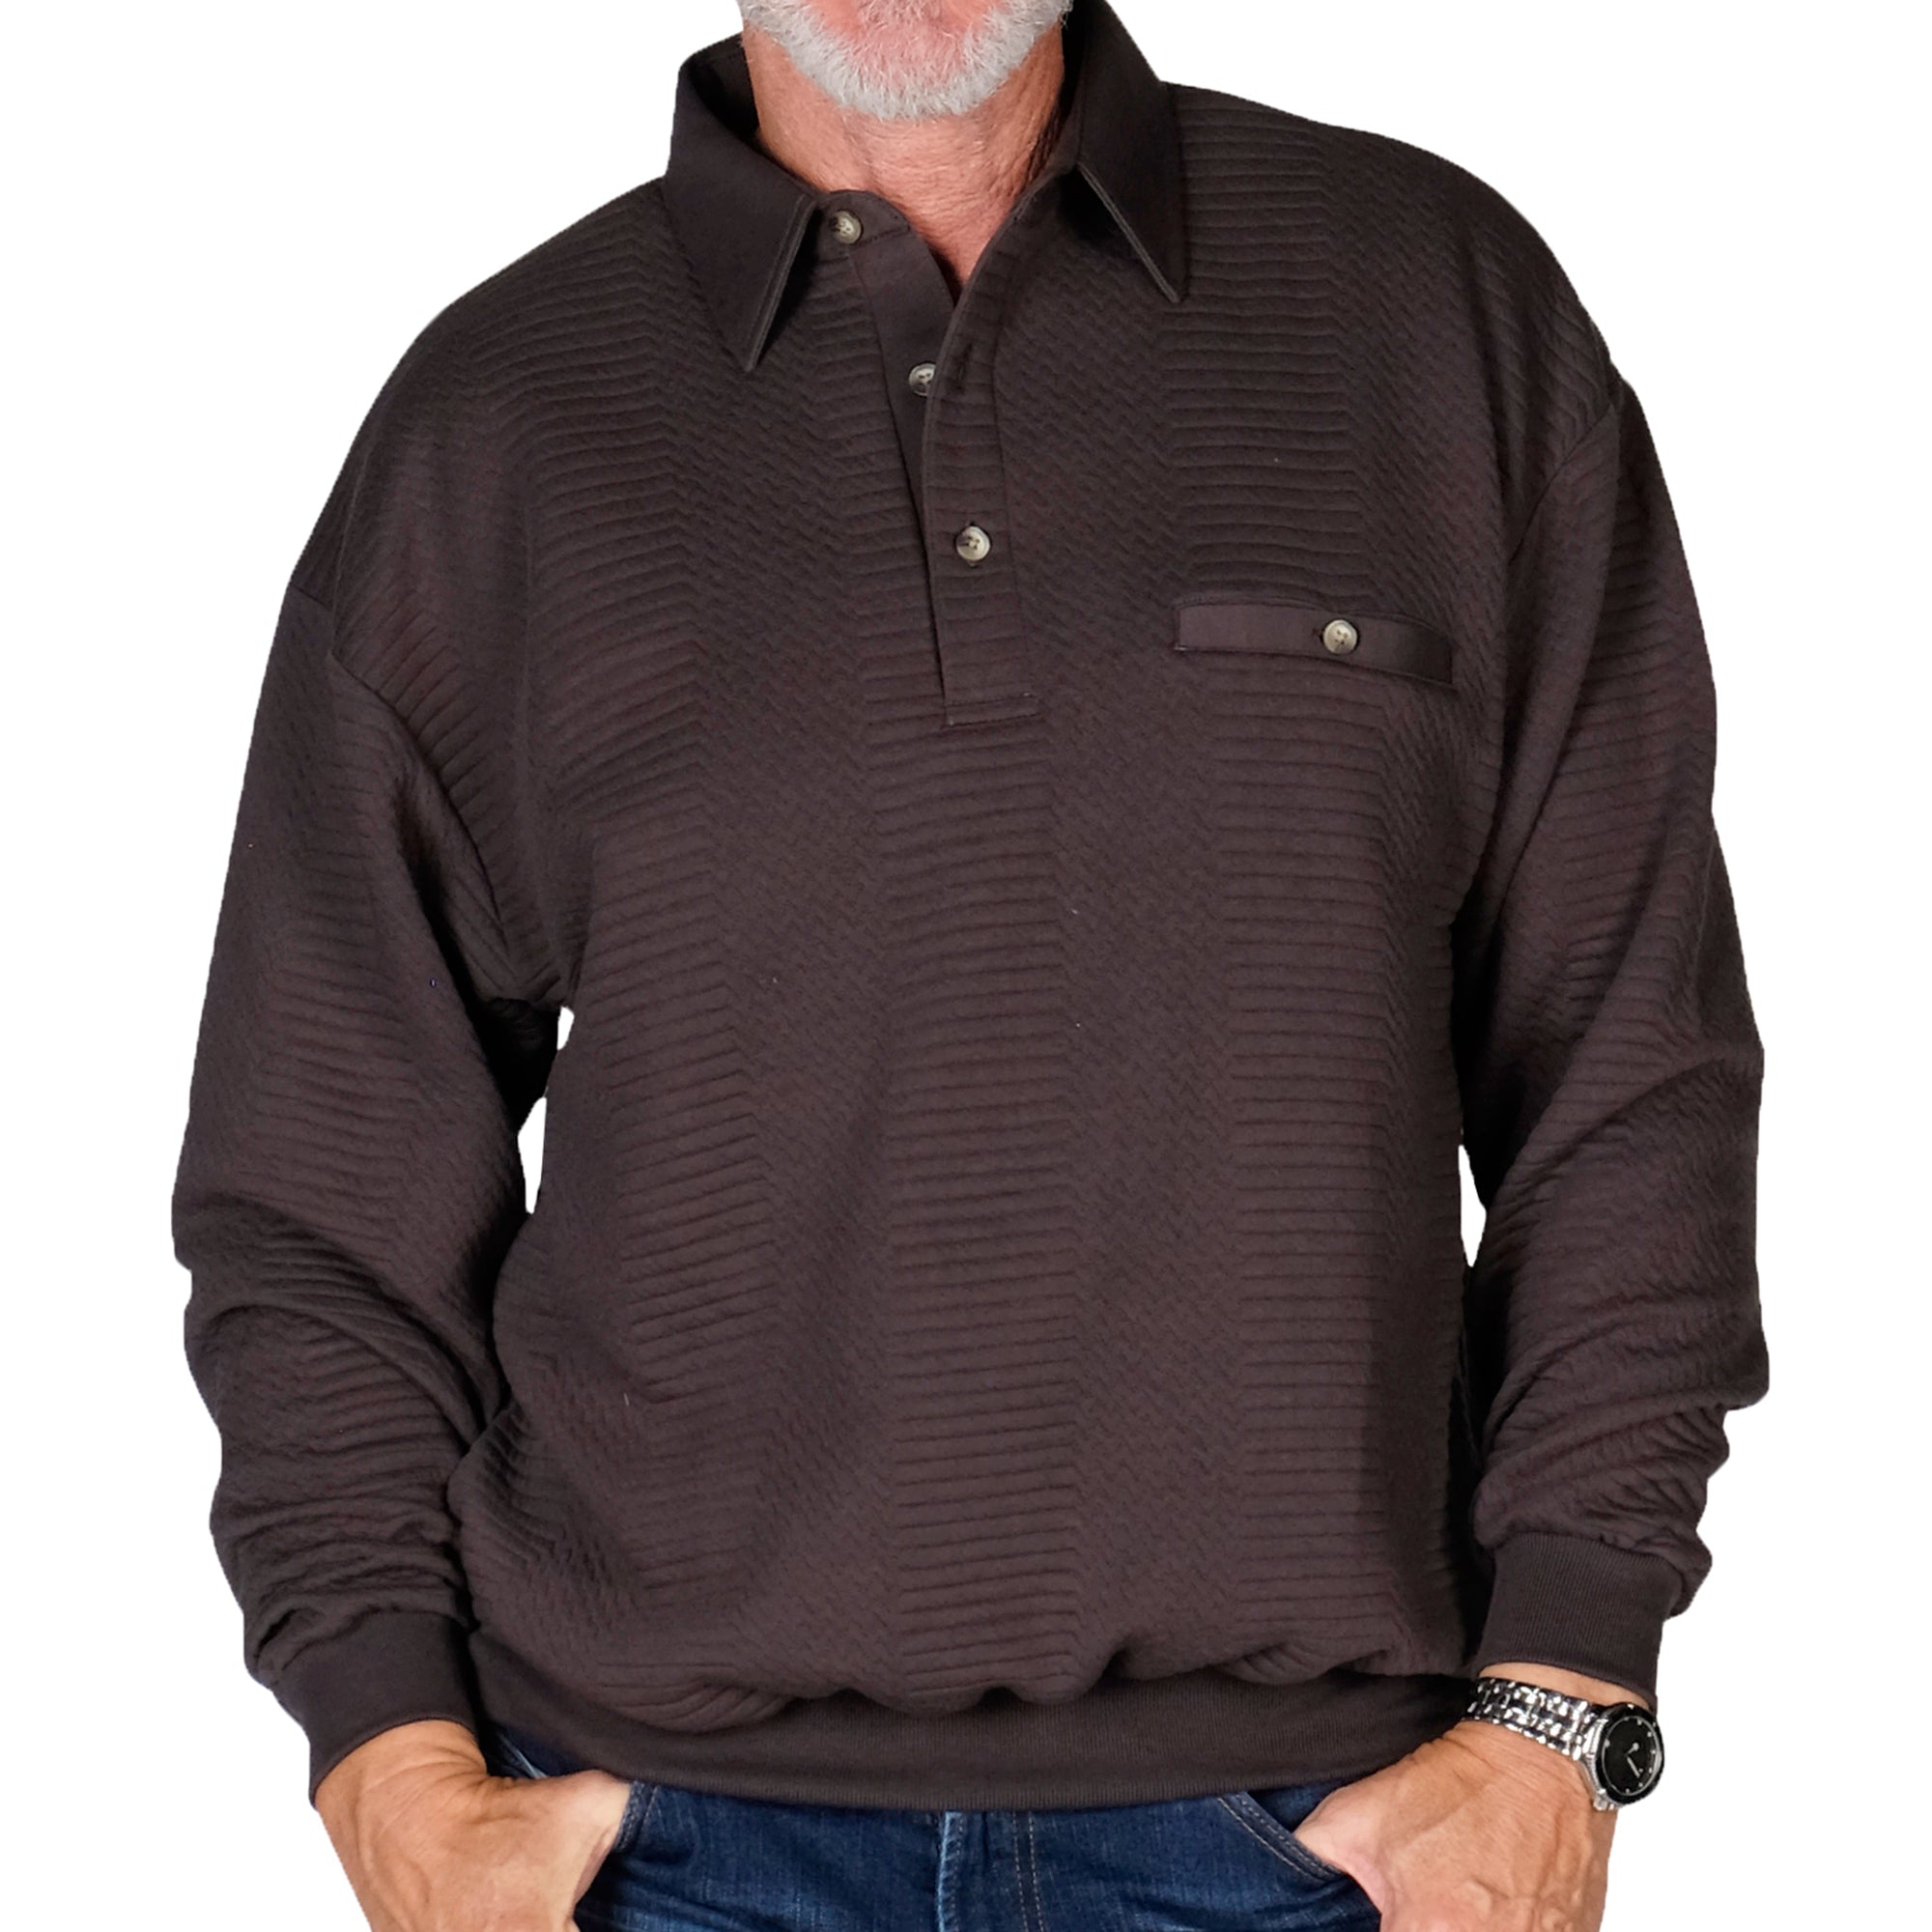 LD Sport Solid Textured Long Sleeve Banded Bottom Shirt - 6094-950 - Black- Big and Tall